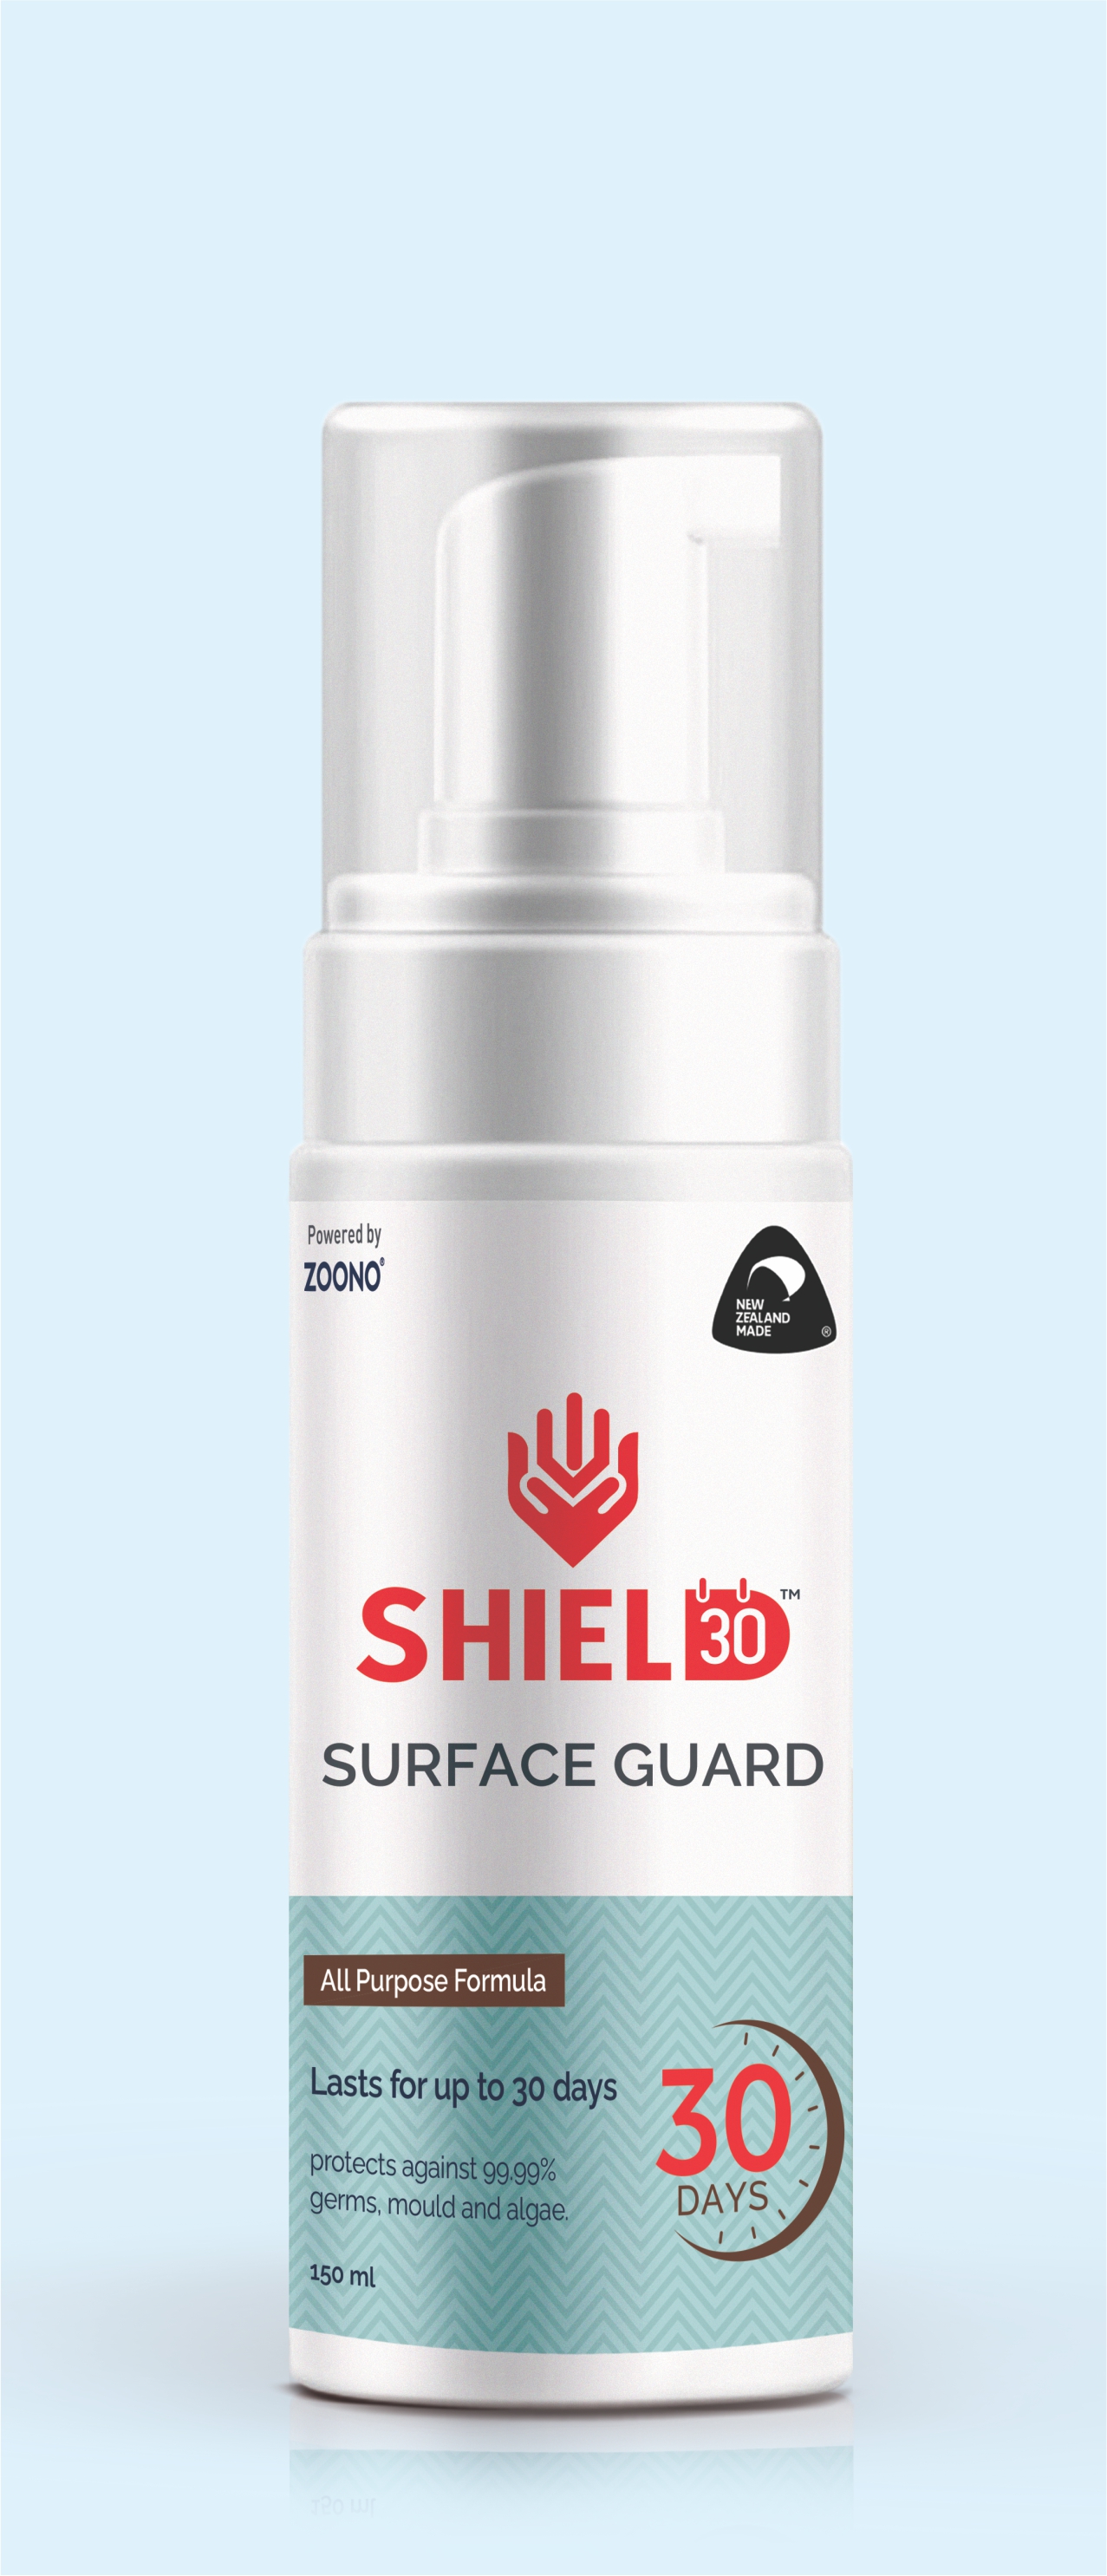 Shield30, Provides 99.99% Protection from Surface-borne Covid Infection, Launched